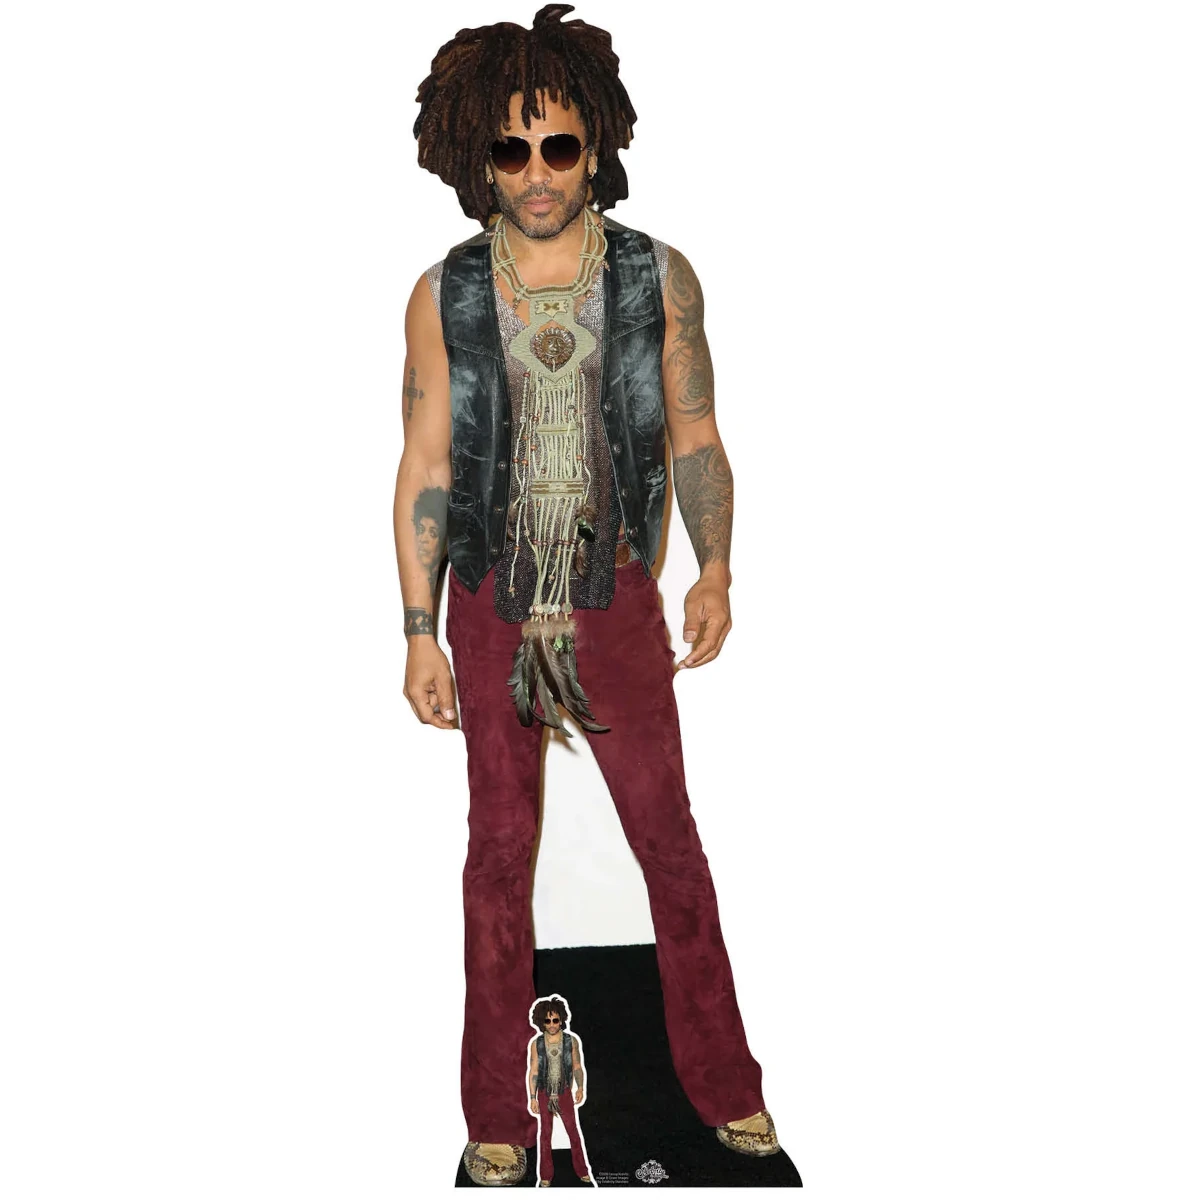 CS908 Lenny Kravitz 'Red Jeans' (American SingerSongwriter) Lifesize + Mini Cardboard Cutout Standee Front